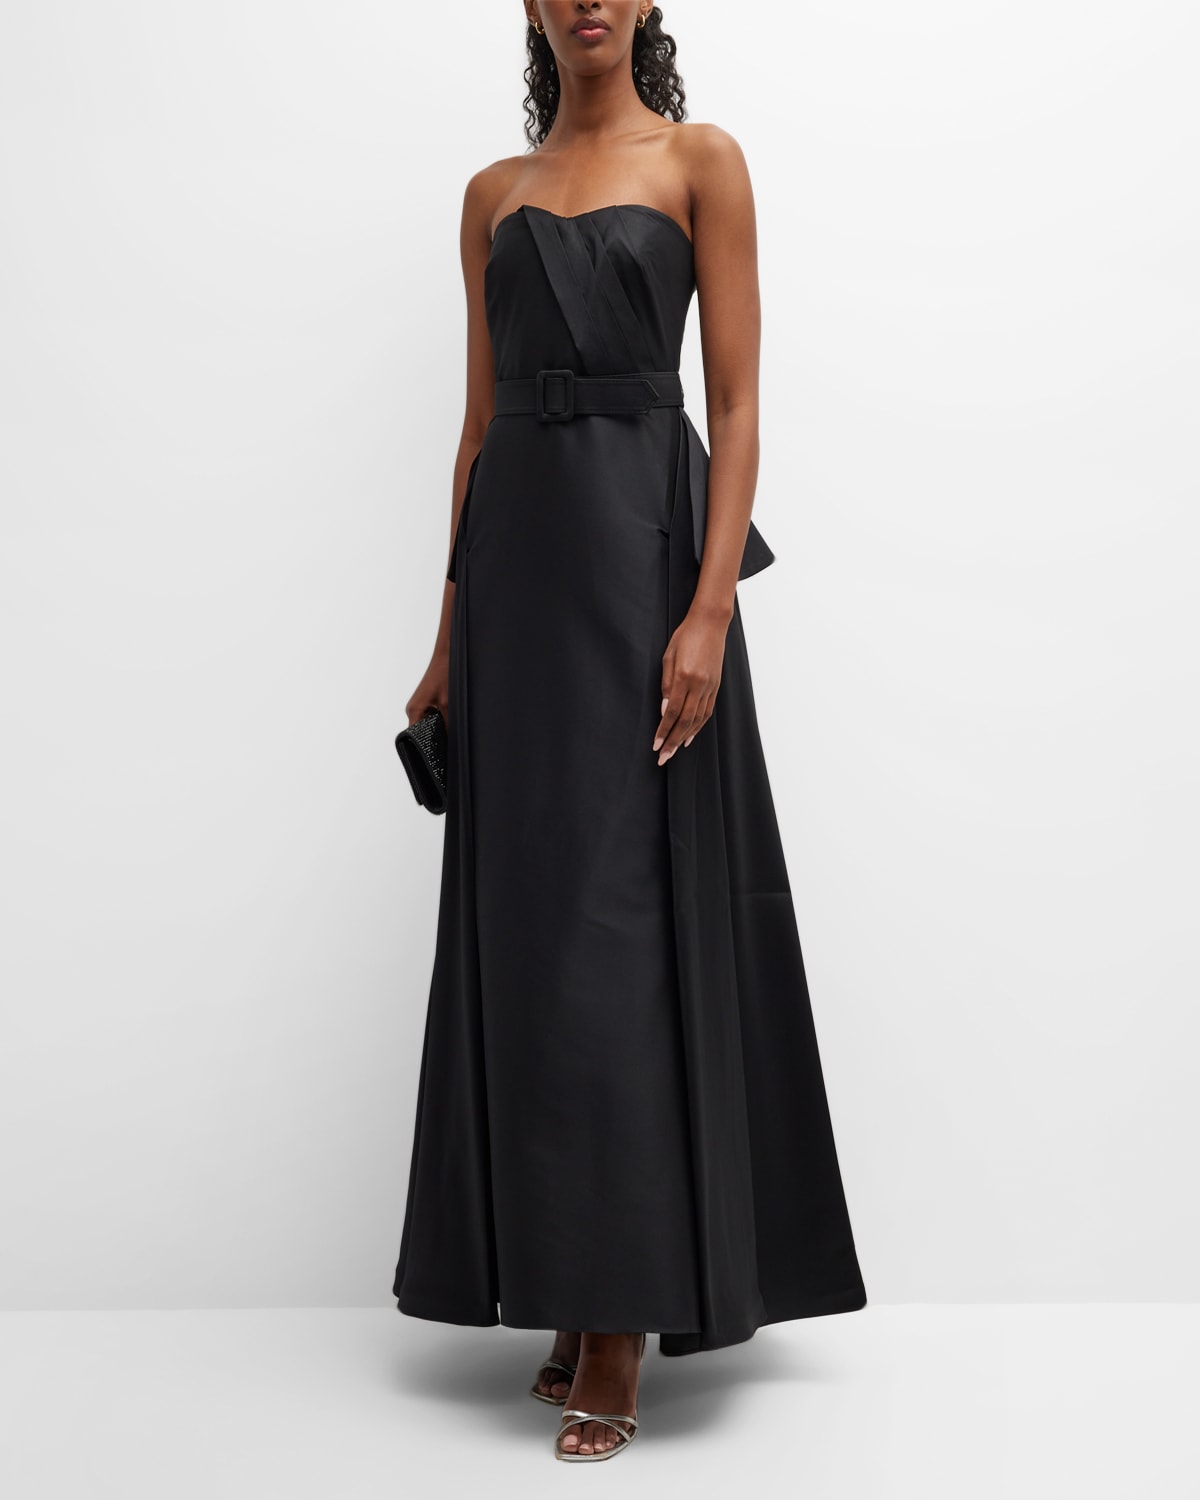 Badgley Mischka Collection Strapless Pleated A-Line Peplum Gown